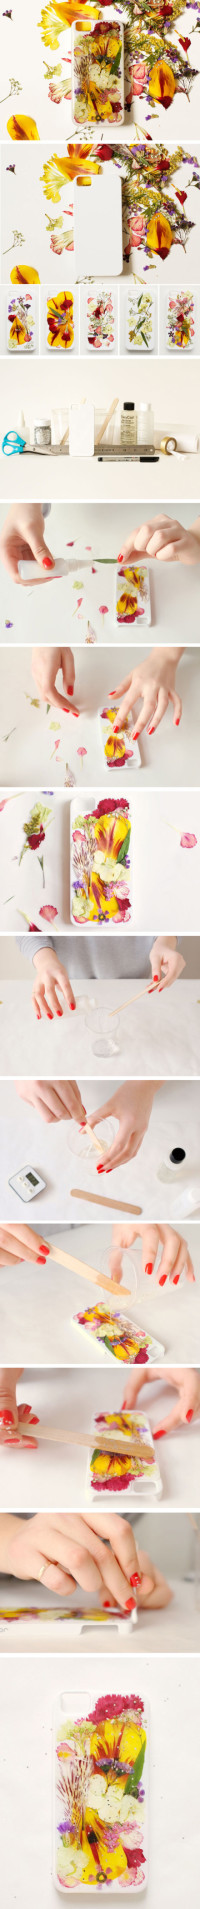 diy dried phone cases